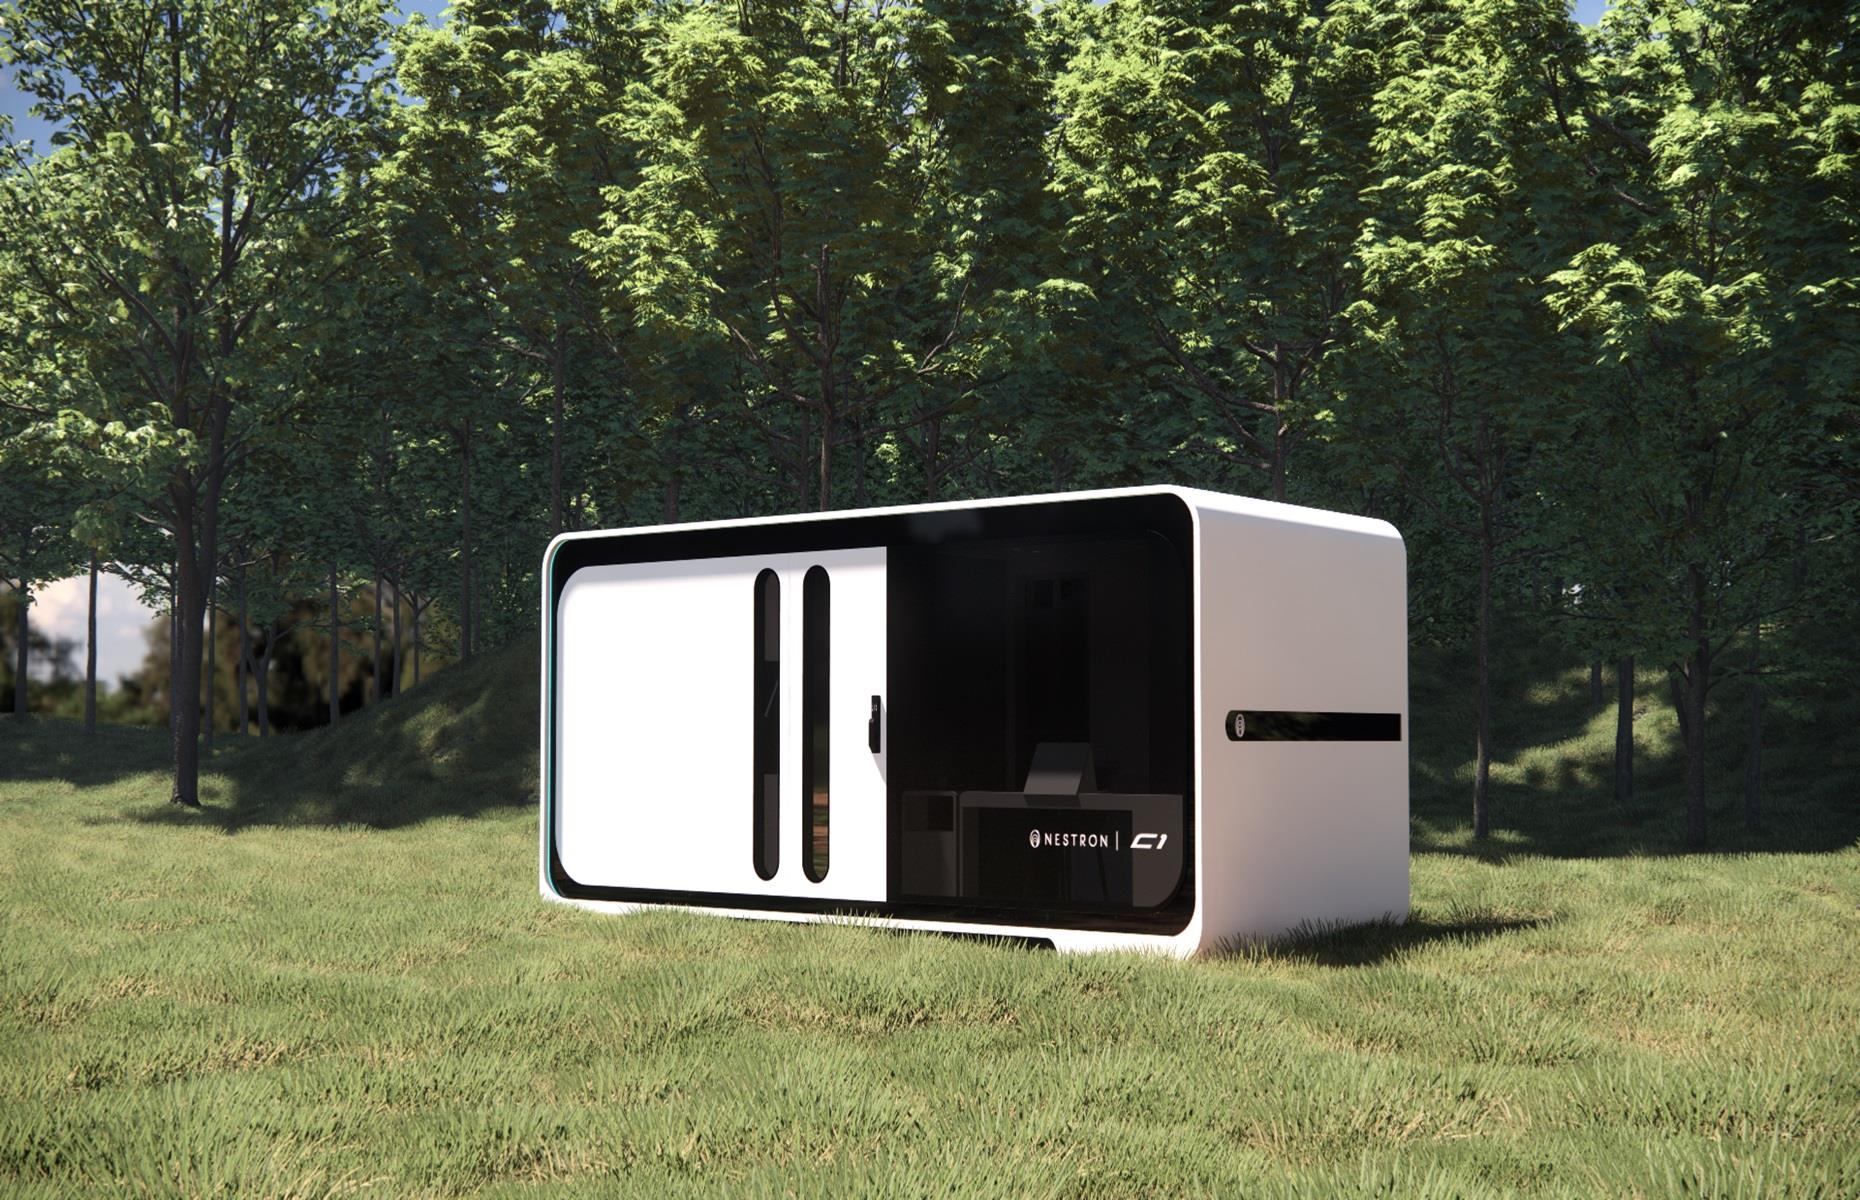 <p>Functional, environmentally friendly and integrated with smart technology, this living pod is perhaps the world's most sophisticated tiny home. Designed by <a href="https://nestron.house/">Nestron</a> in Singapore, the Cube One blends futuristic design with sustainable ideas, adding some sci-fi fun to the world of prefabricated architecture.</p>  <p>Designed for dense urban areas where low-cost housing is in high demand, the green home features just 254 square feet of inside space and comes with various interior design options.</p>